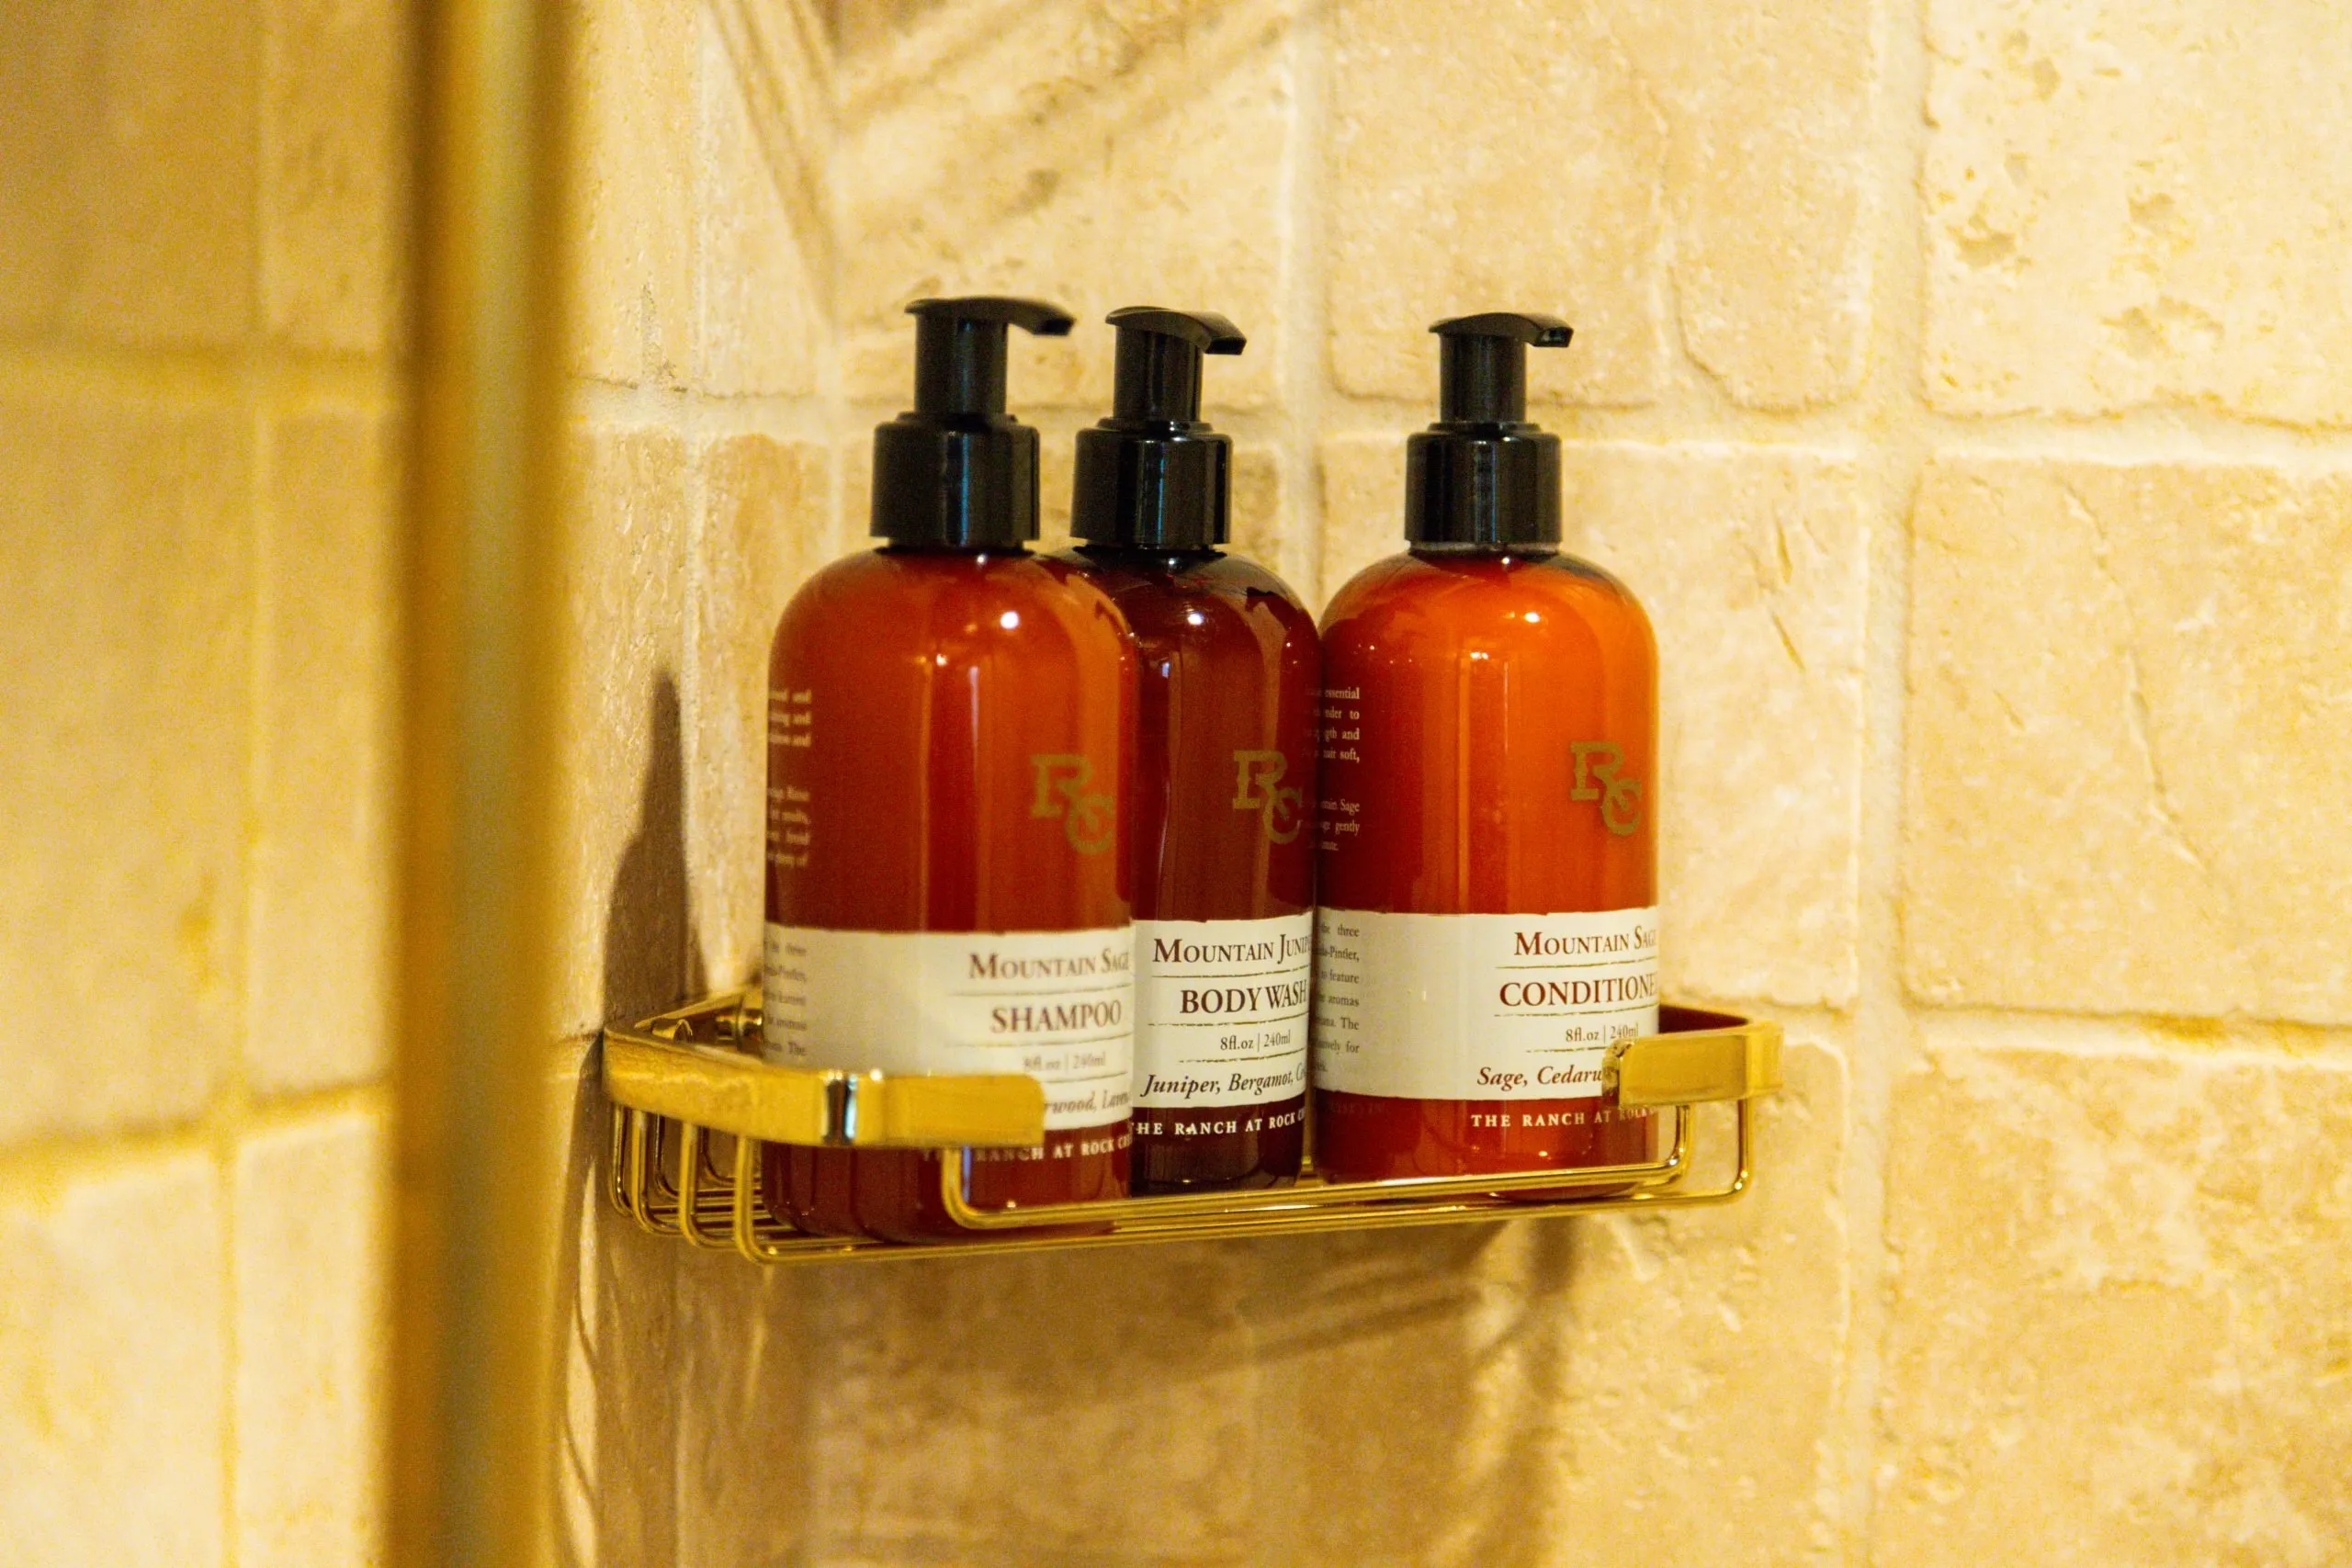 Close-up of shampoo, body wash and conditioner bottles in a shower